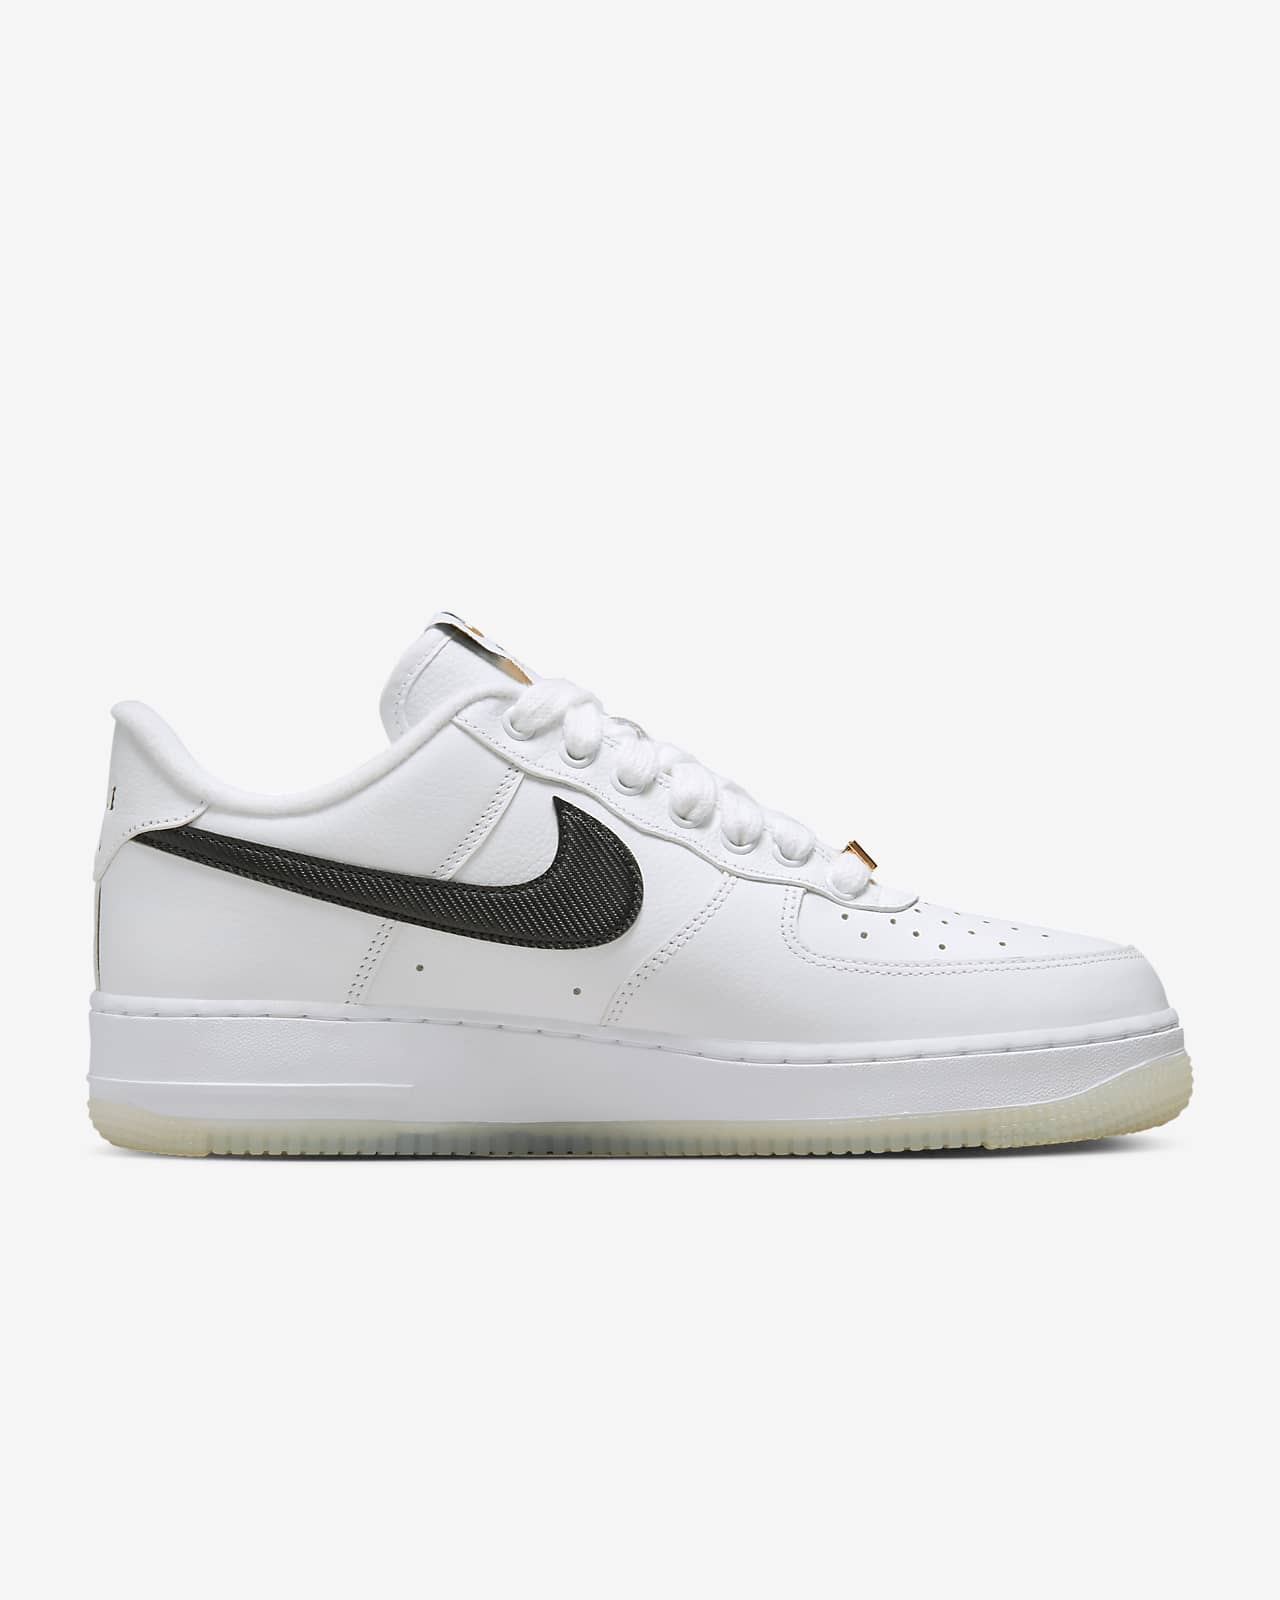 Oxidize Above head and shoulder Carrot Nike Air Force 1 '07 Premium Men's Shoes. Nike.com